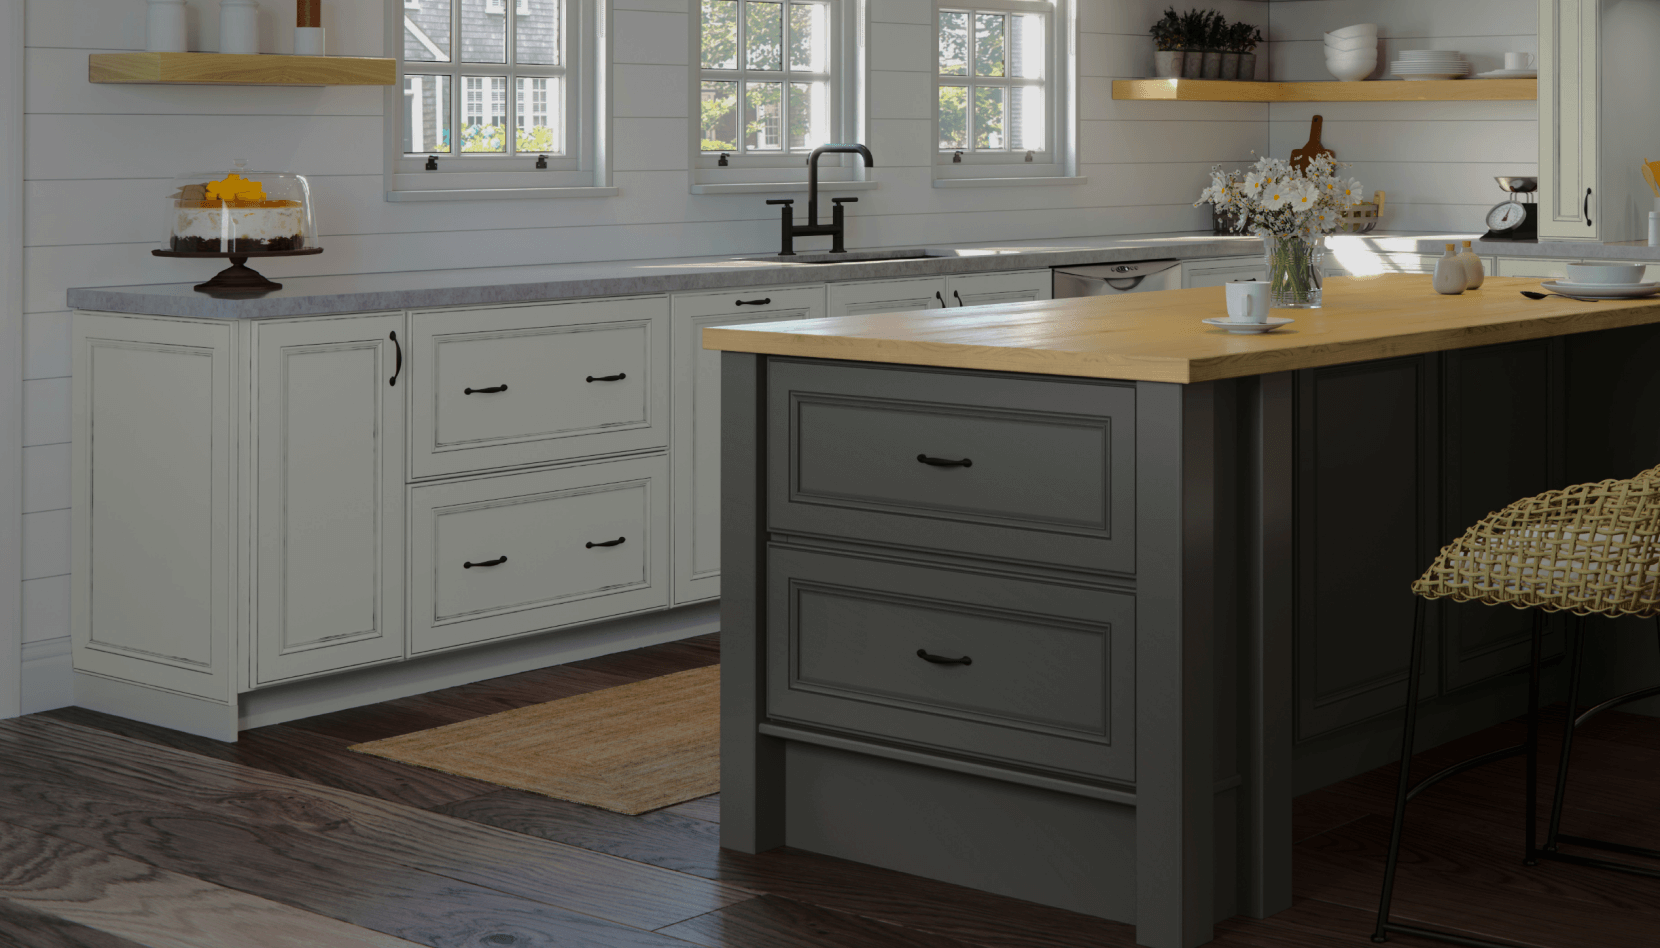 Timberlake Cabinet Reviews 2021 3 Tiers Of Furniture Quality Housesitworld